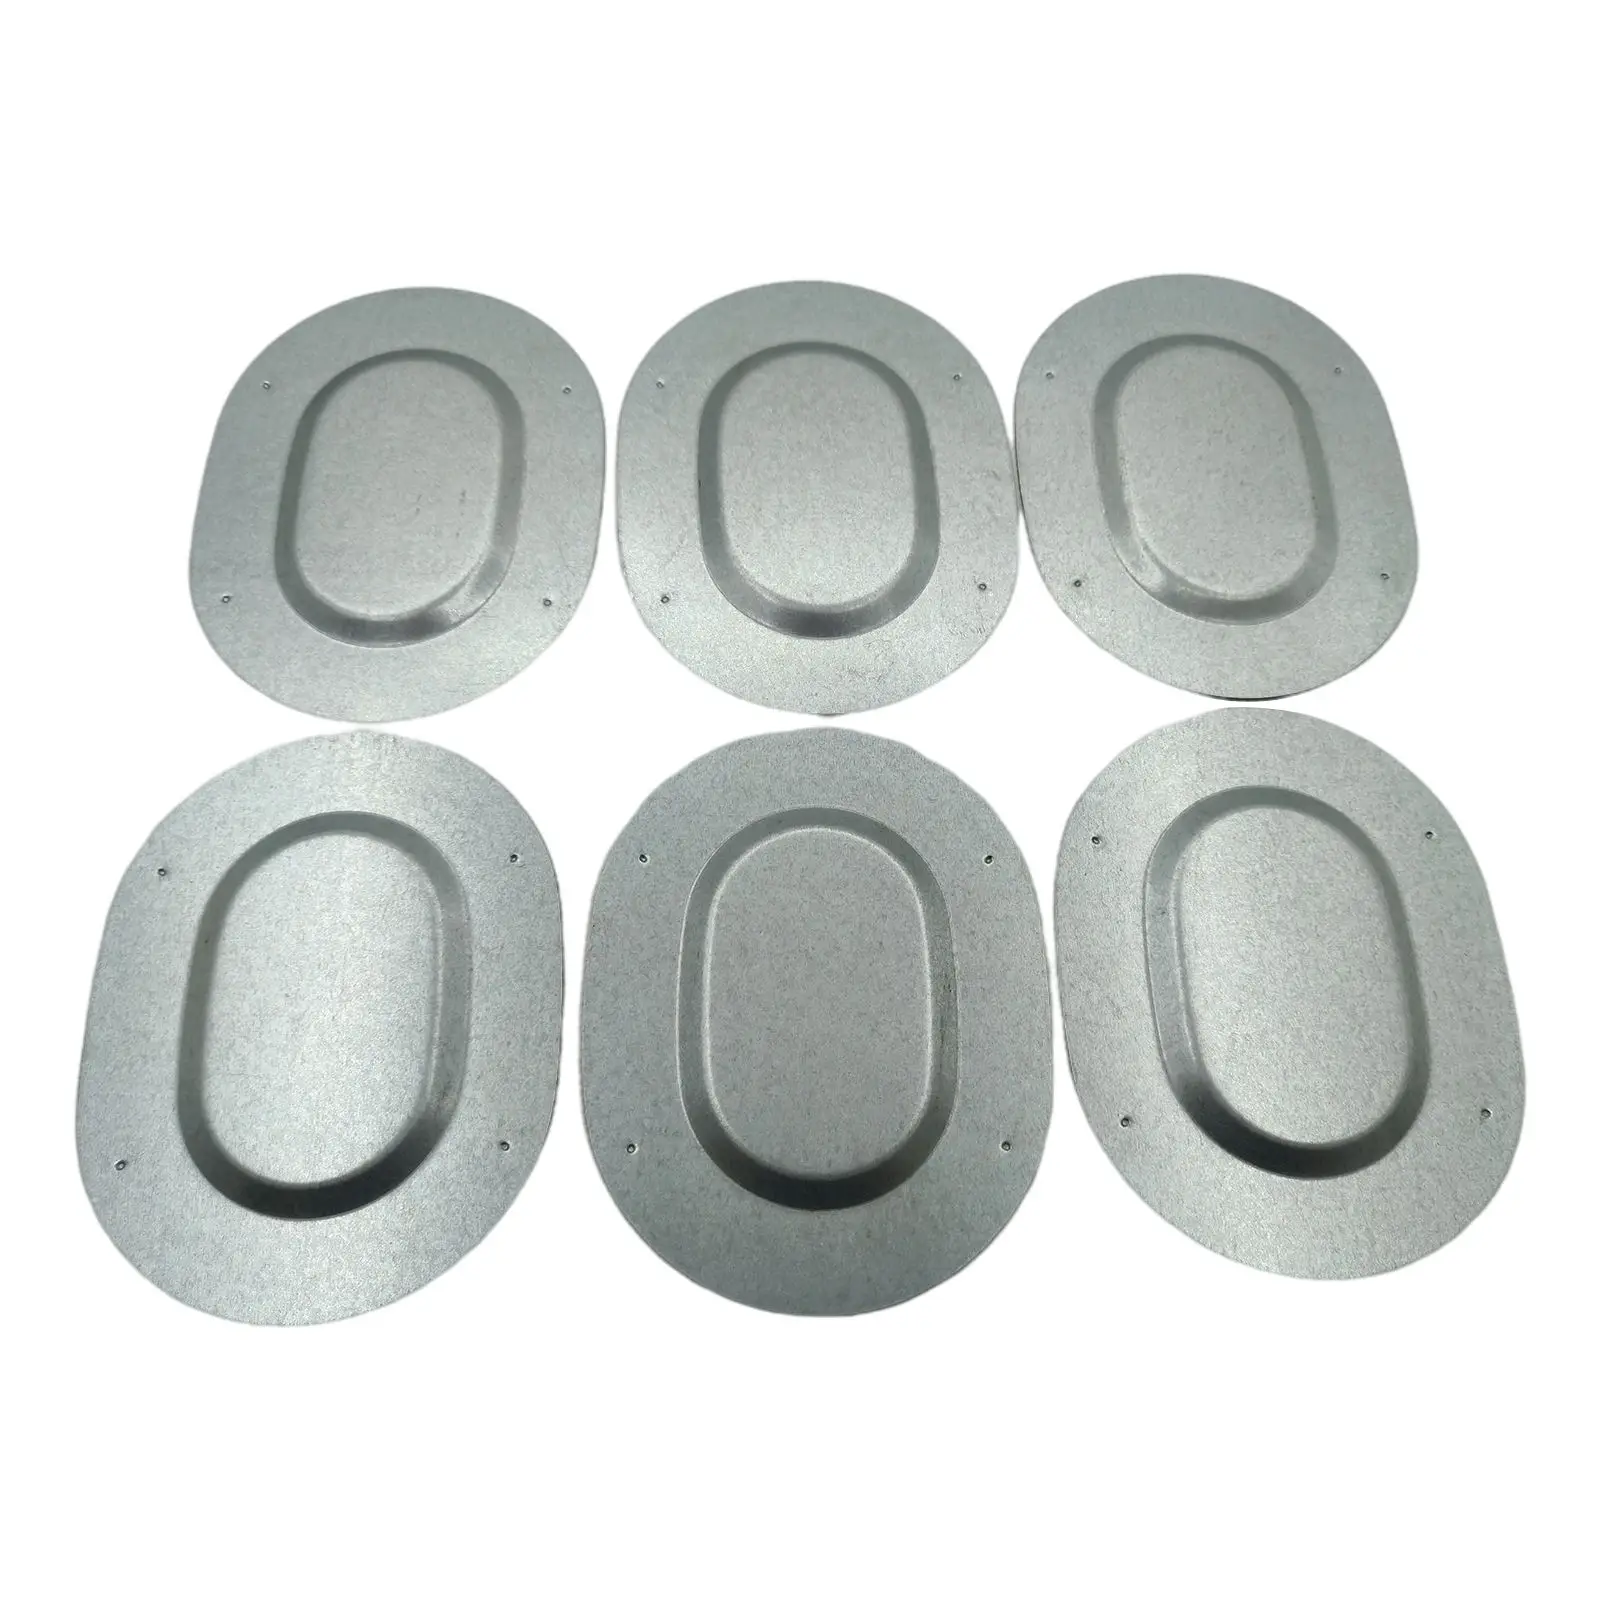 6x Trunk Floor Pan Drain Plugs Set from 67-77 Oval Drain Plug Engine Parts Body Galvanized Metal for Chevelle A-Body